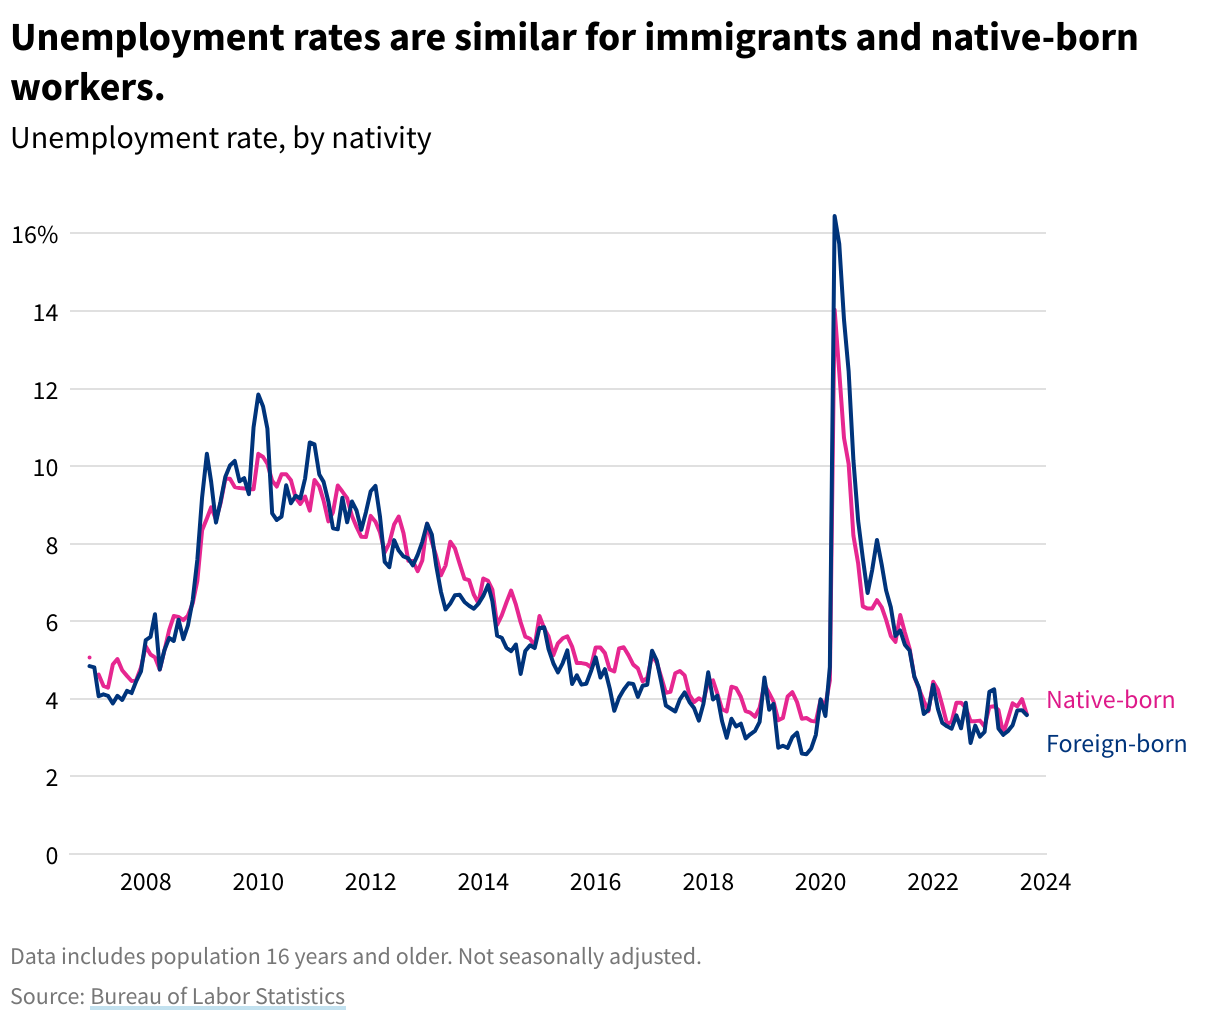 Line chart showing the unemployment rates for native-born and foreign-born workers. Both lines have similar trends, spiking in 2020 before returning to pre-pandemic levels.